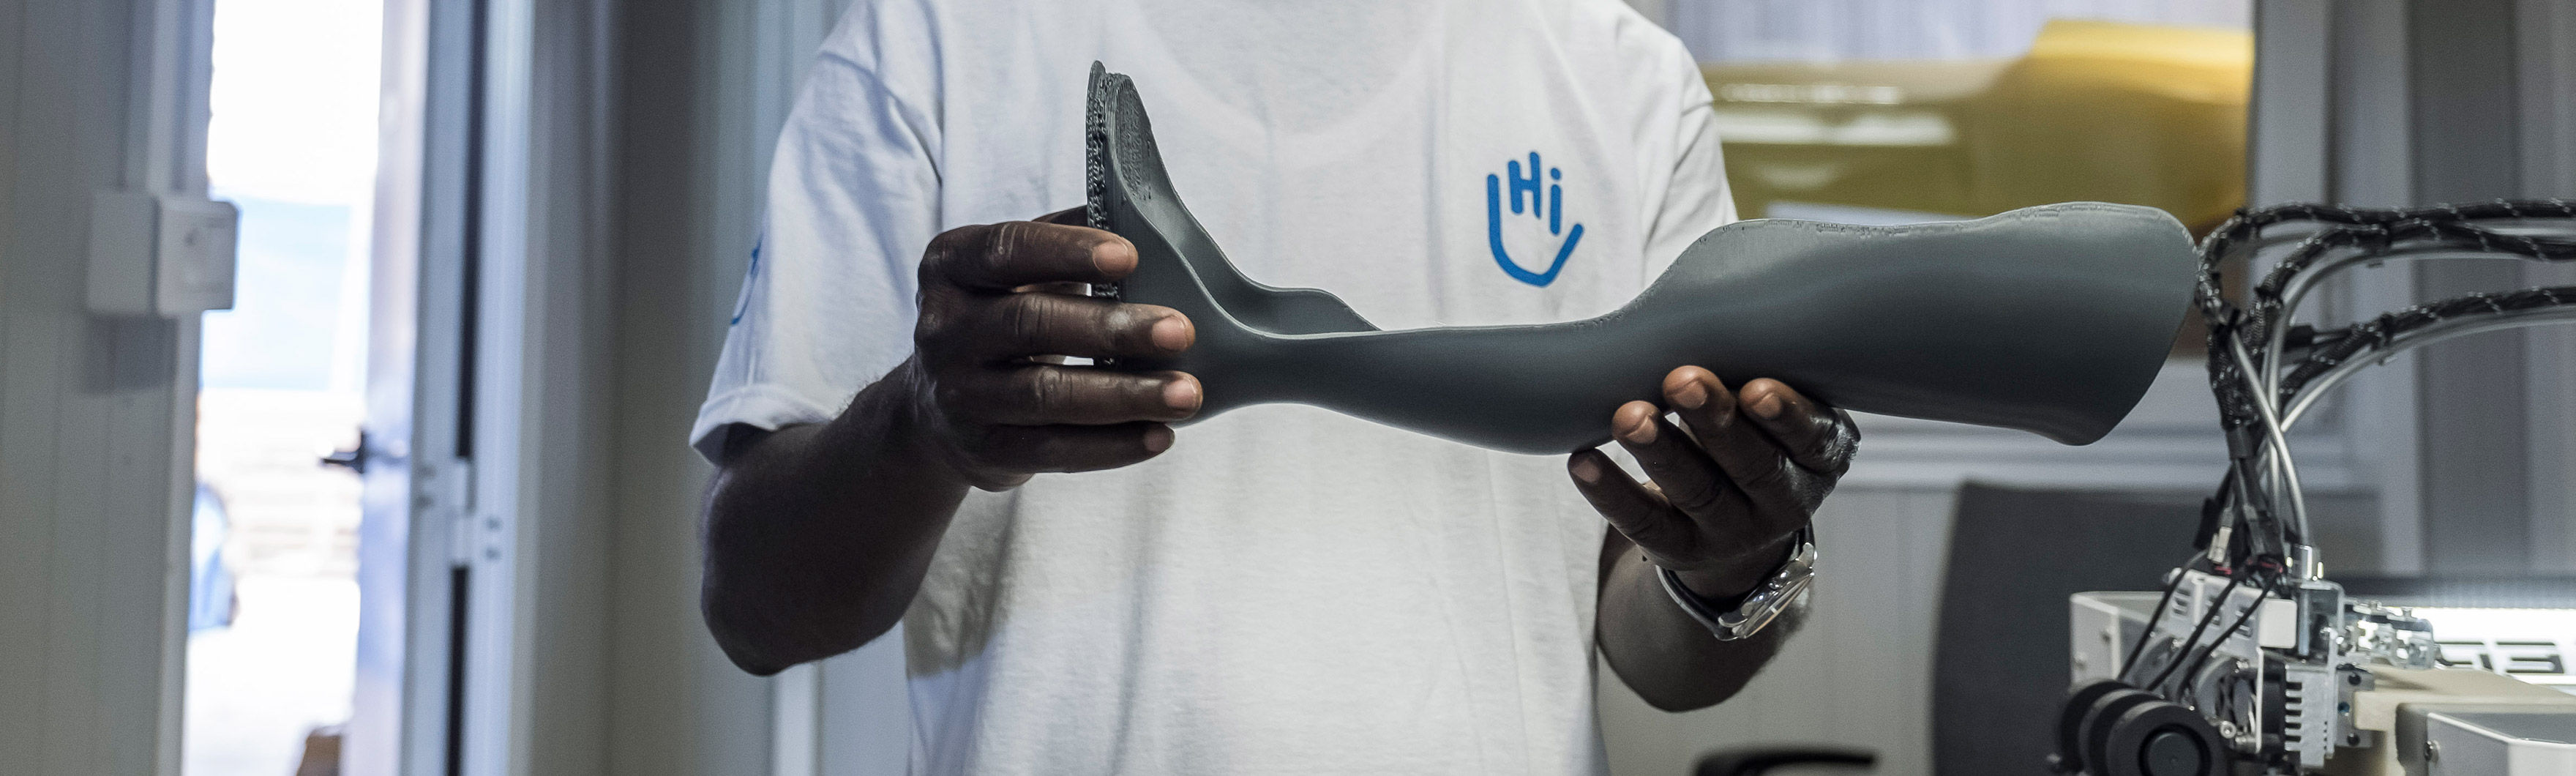 Togo, Lomé, technician, Fabrice DJODJI, checks a 3D printed orthosis. HI, as part of the IMP&ACTE 3D project, is using 3D technology for a clinical trial.